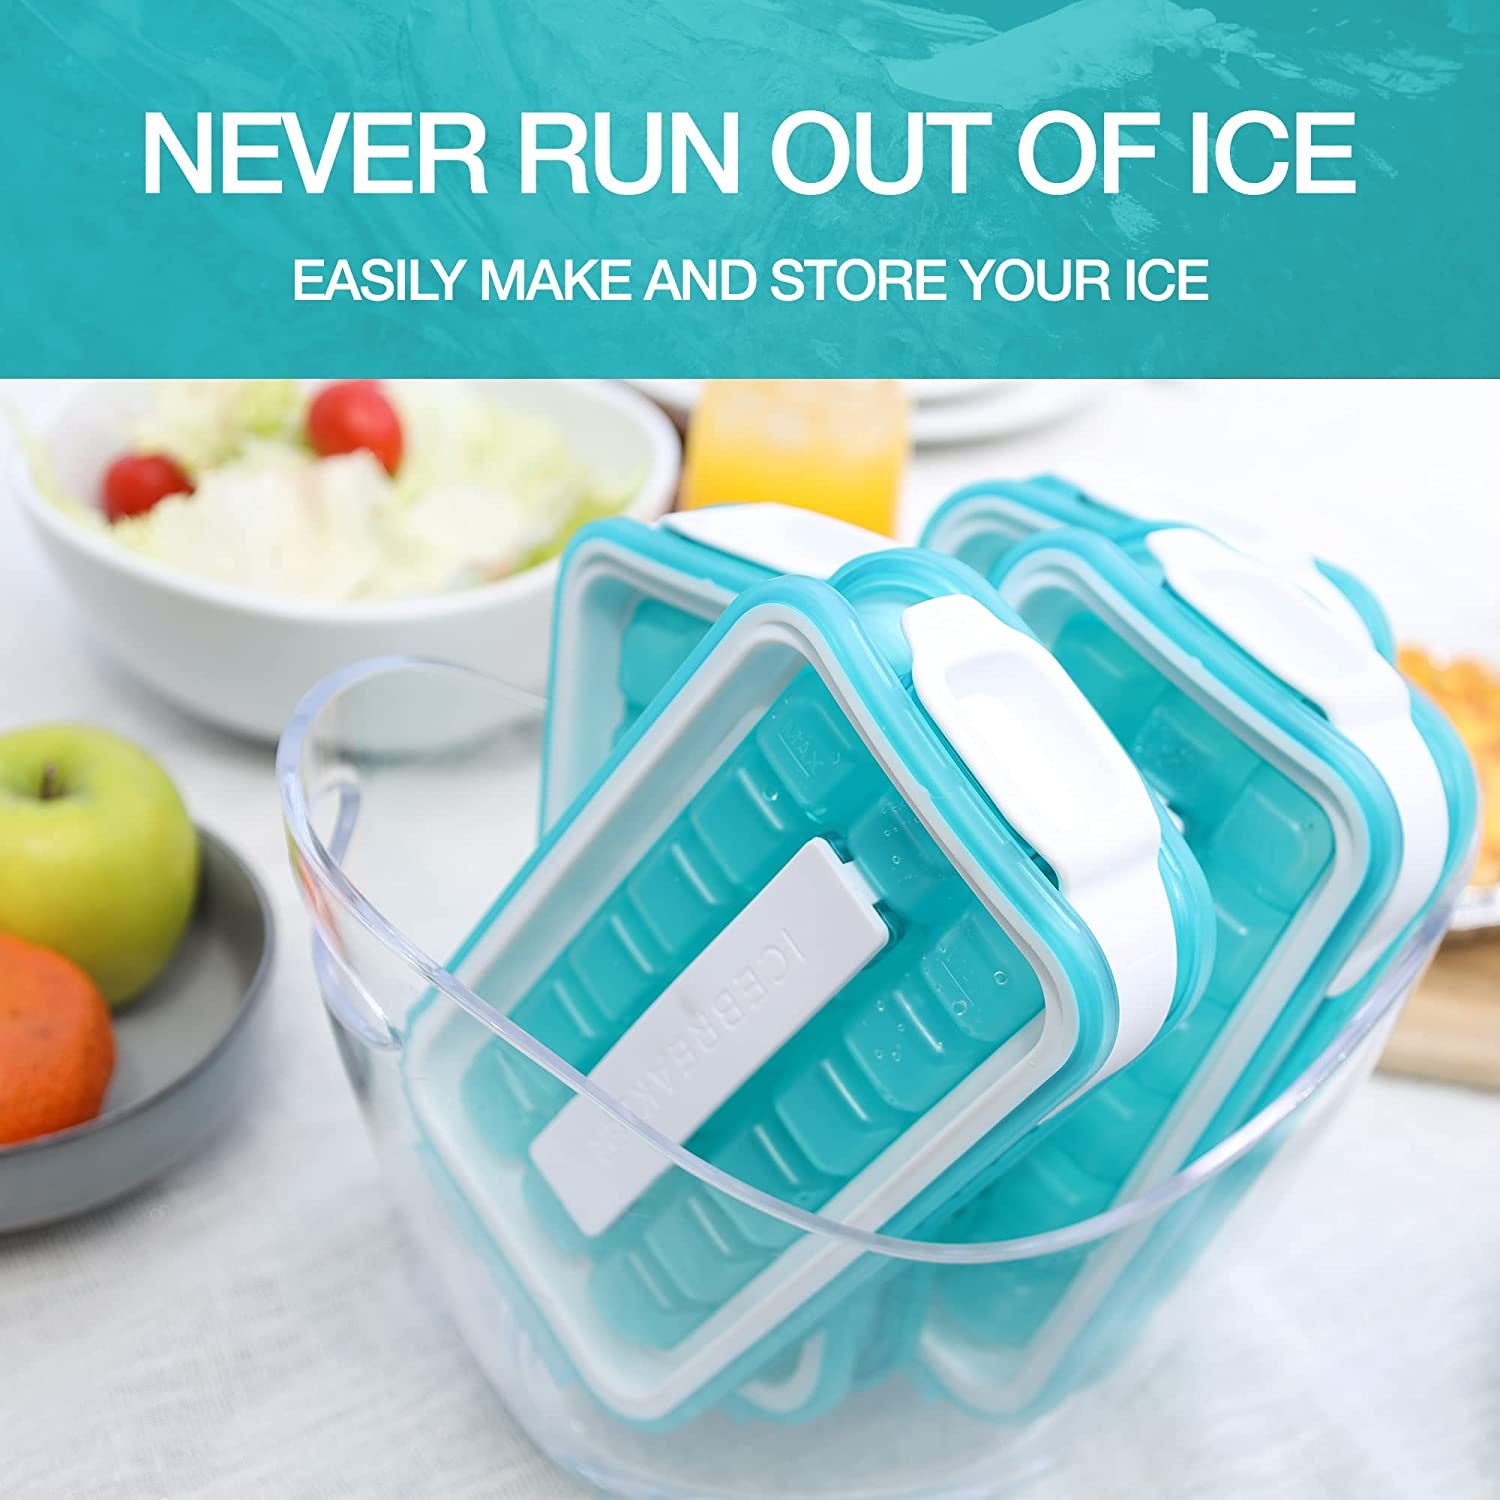 CLEAR POP 2023 - Make and Serve Ice without Ever Touching the Ice - the Sanitary Ice Tray for Freezer - NO Spills Silicone Tray with Lid - Ice Cube Maker 18 Ice Cubes